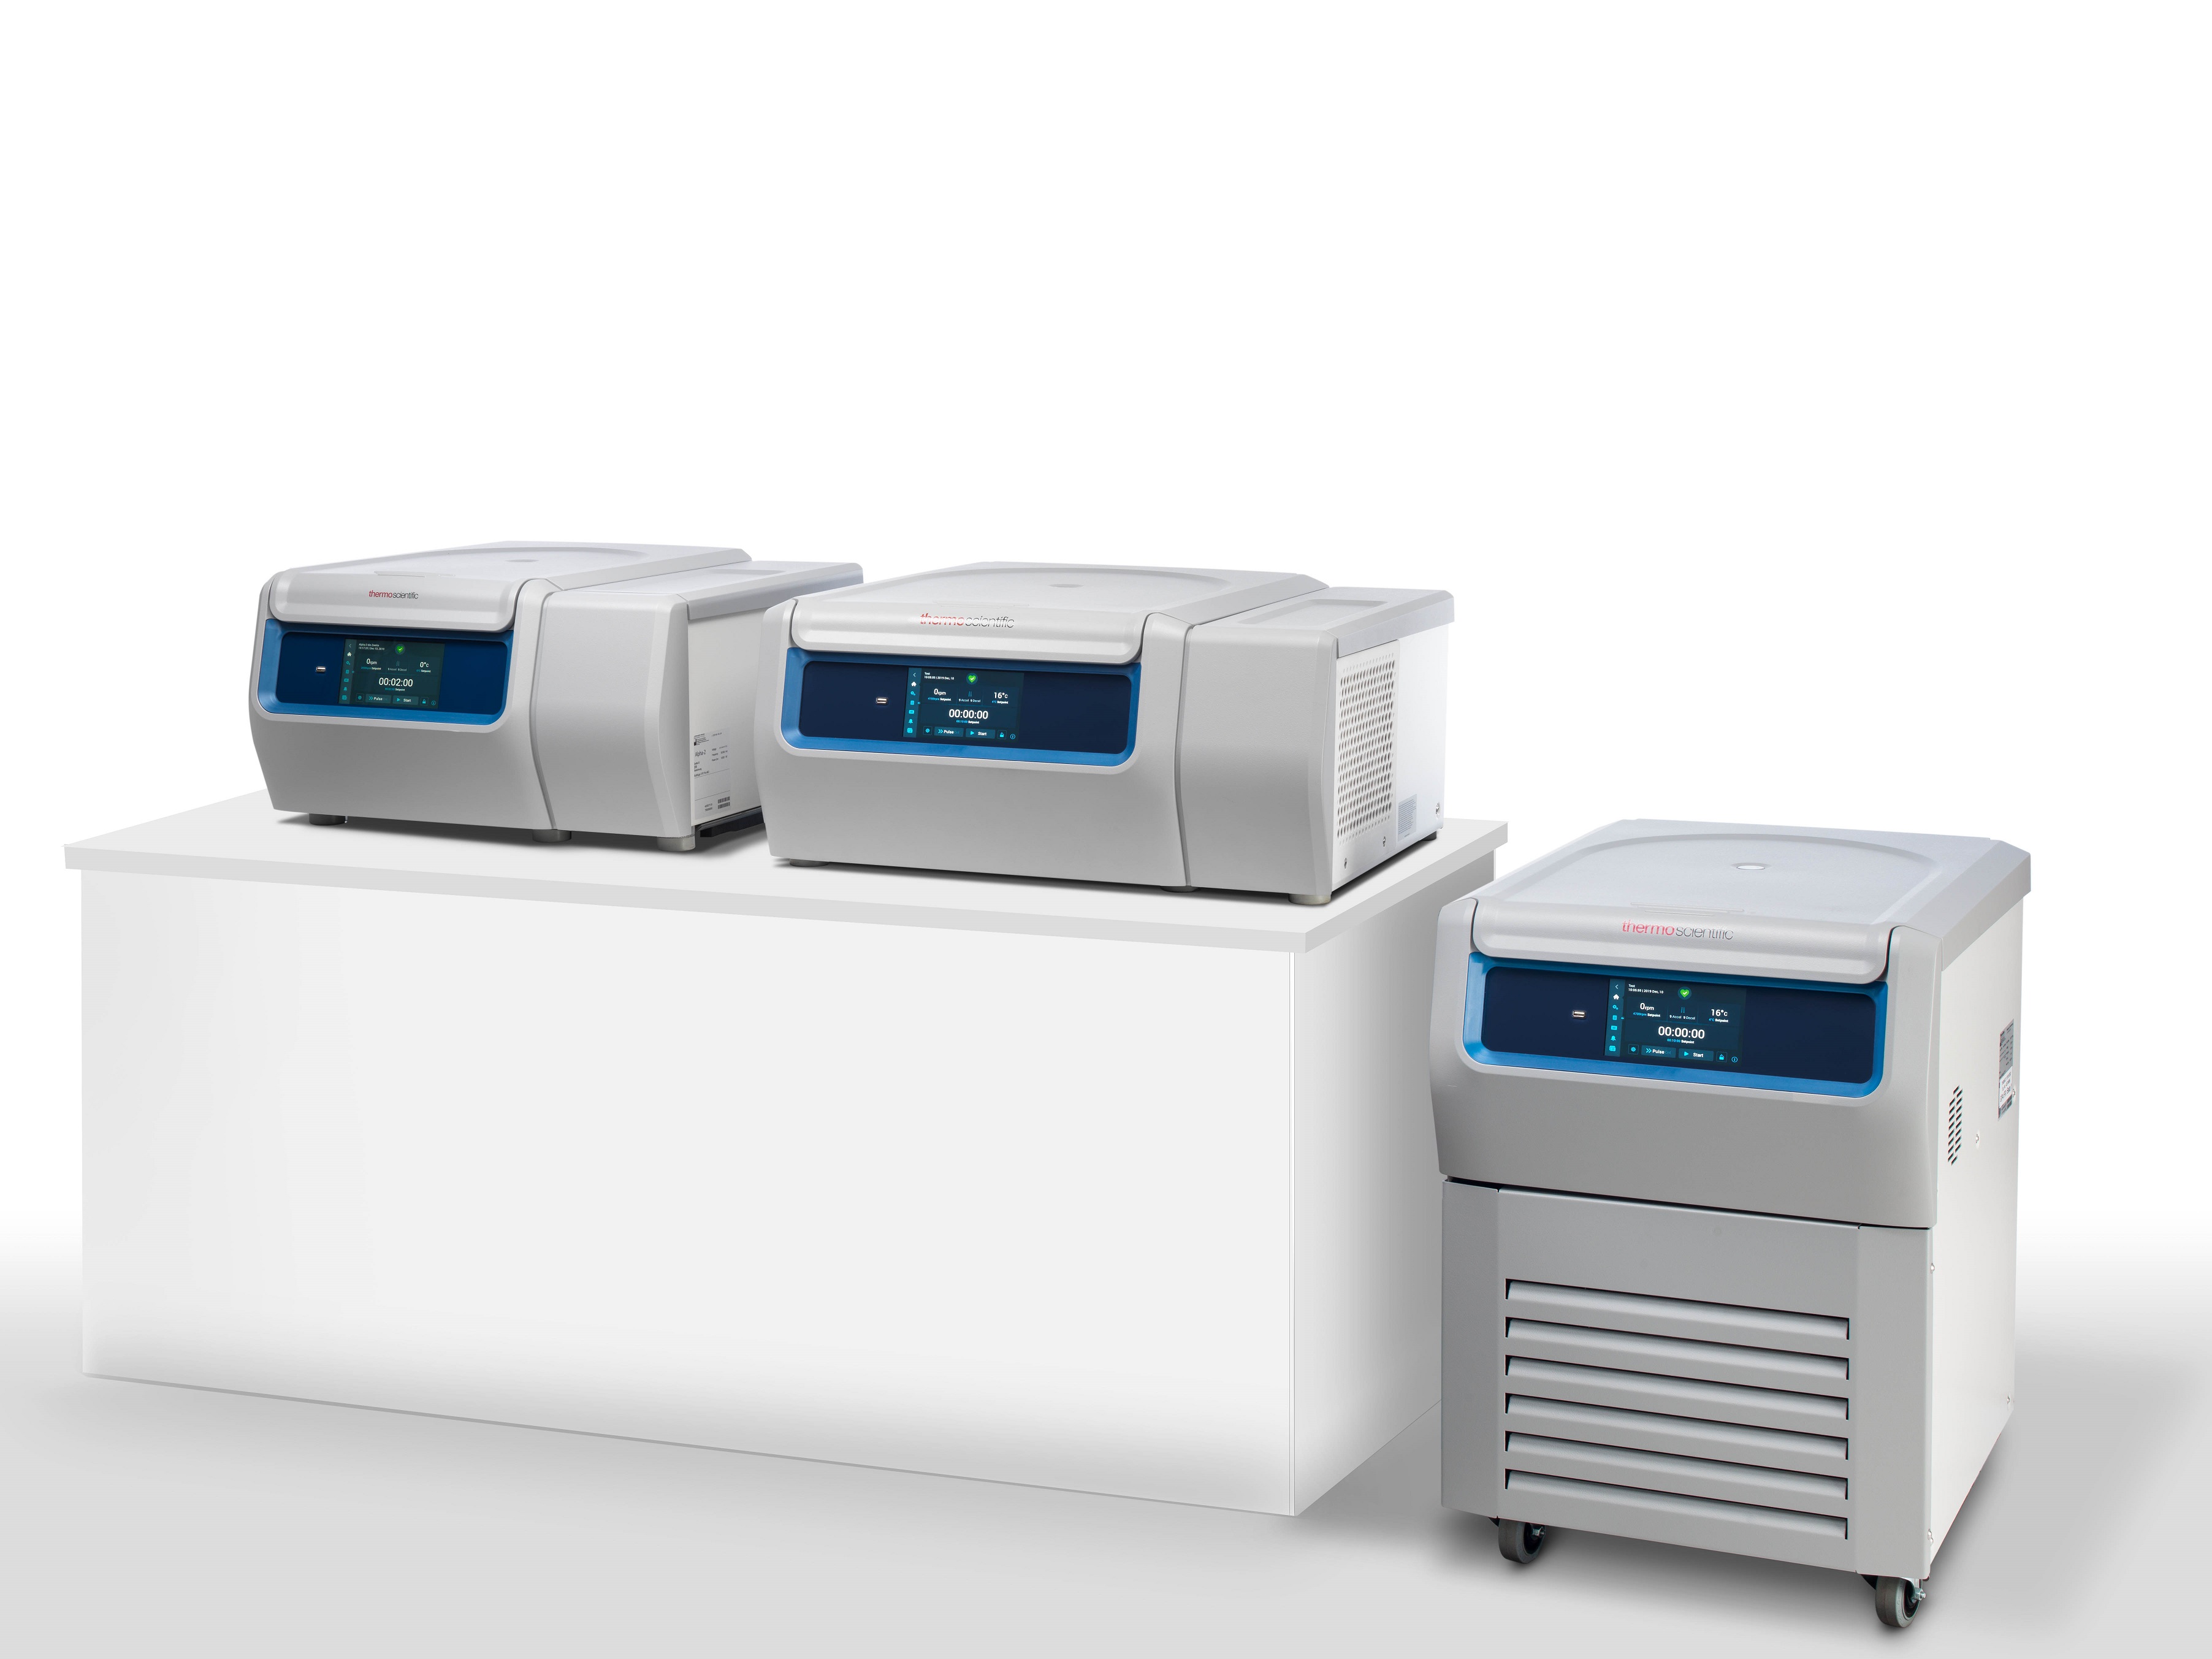 Sorvall X Proハイパフォーマンスユニバーサル遠心機 | サーモフィッシャーサイエンティフィック株式会社／Thermo Fisher  Scientific K.K. - Powered by イプロス